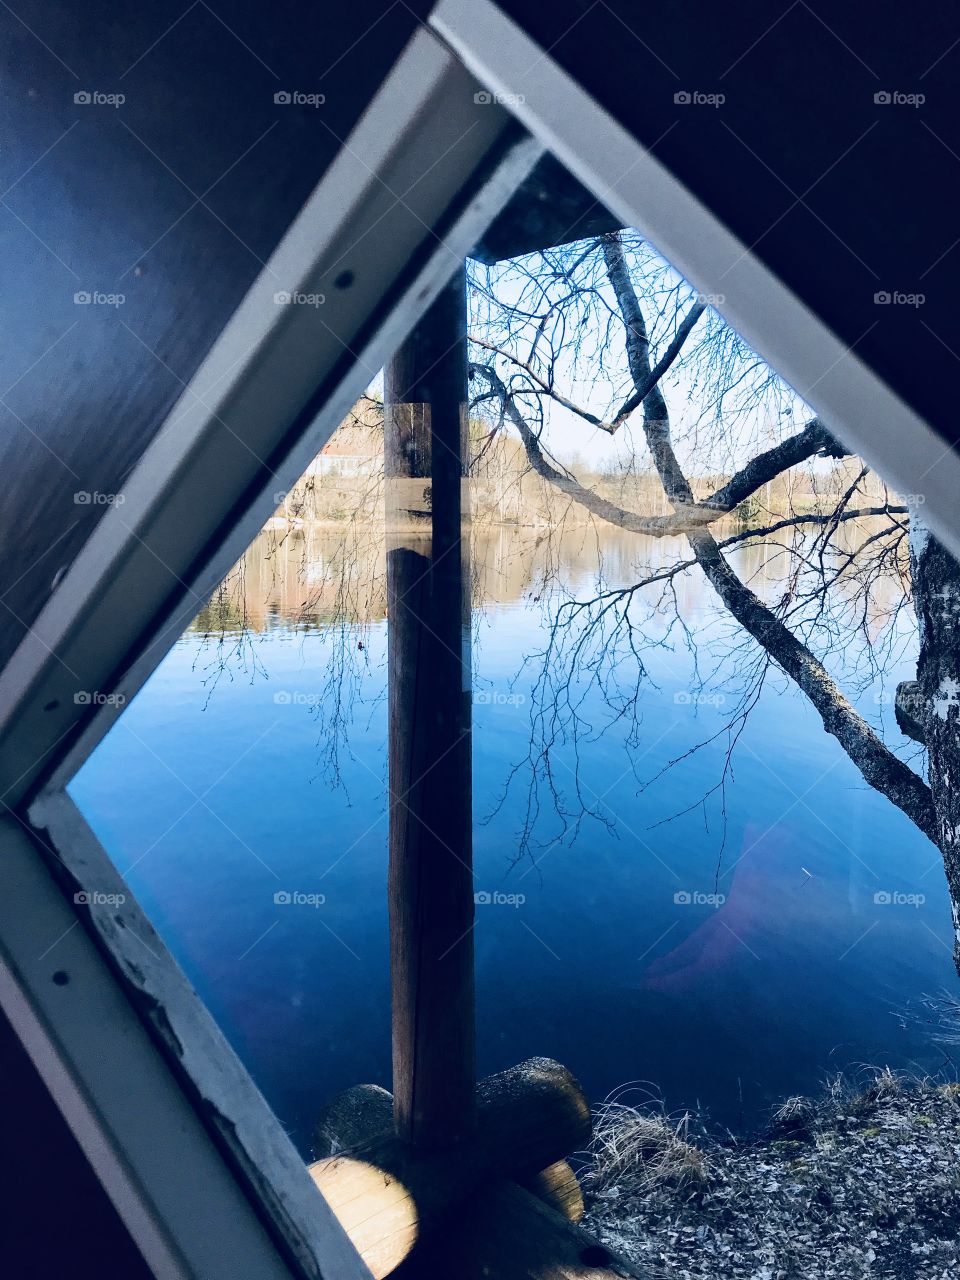 A view through the window to a lake 